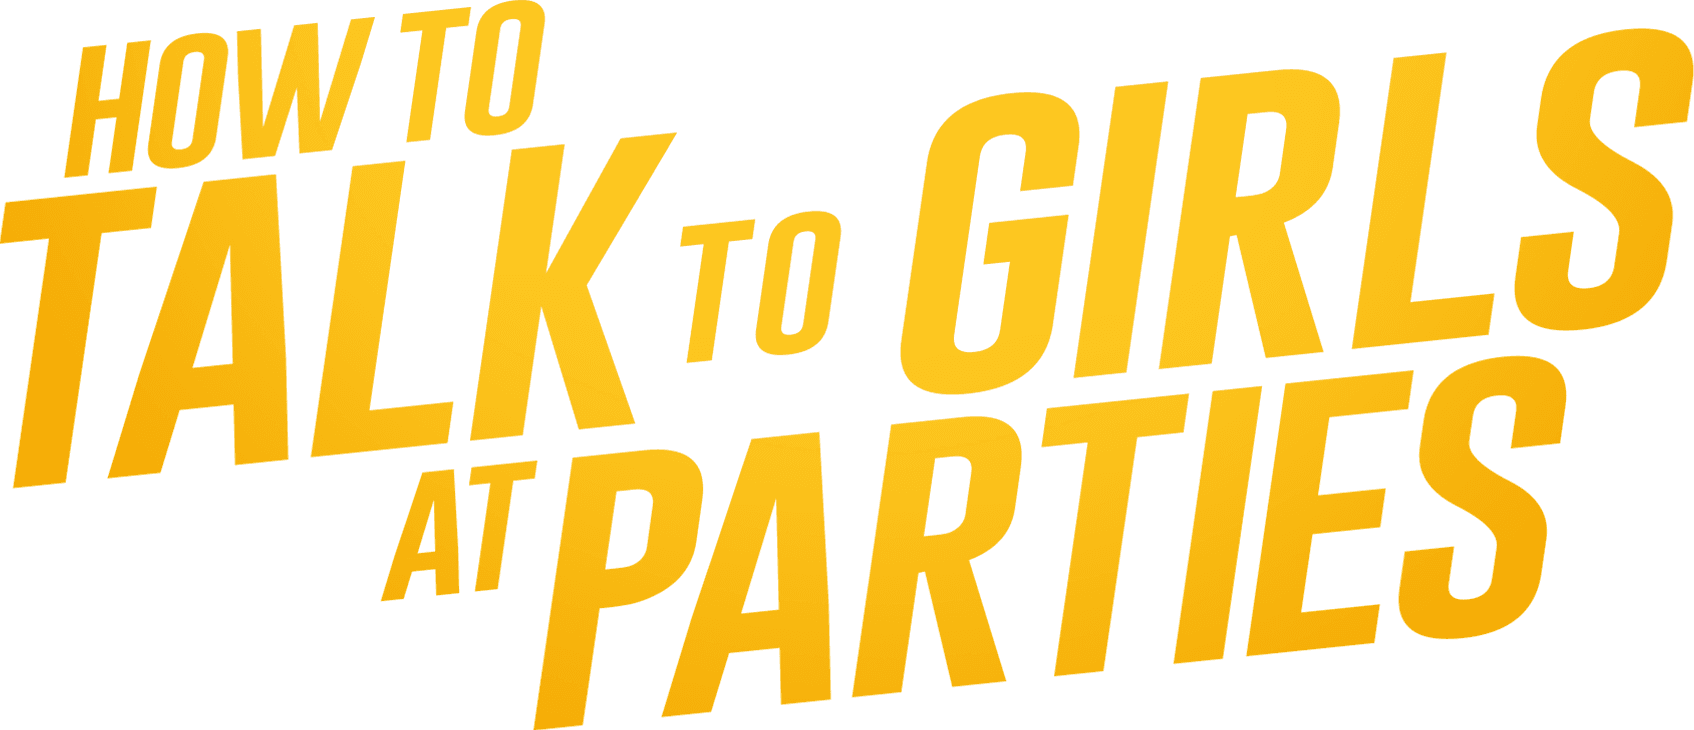 How to Talk to Girls at Parties logo